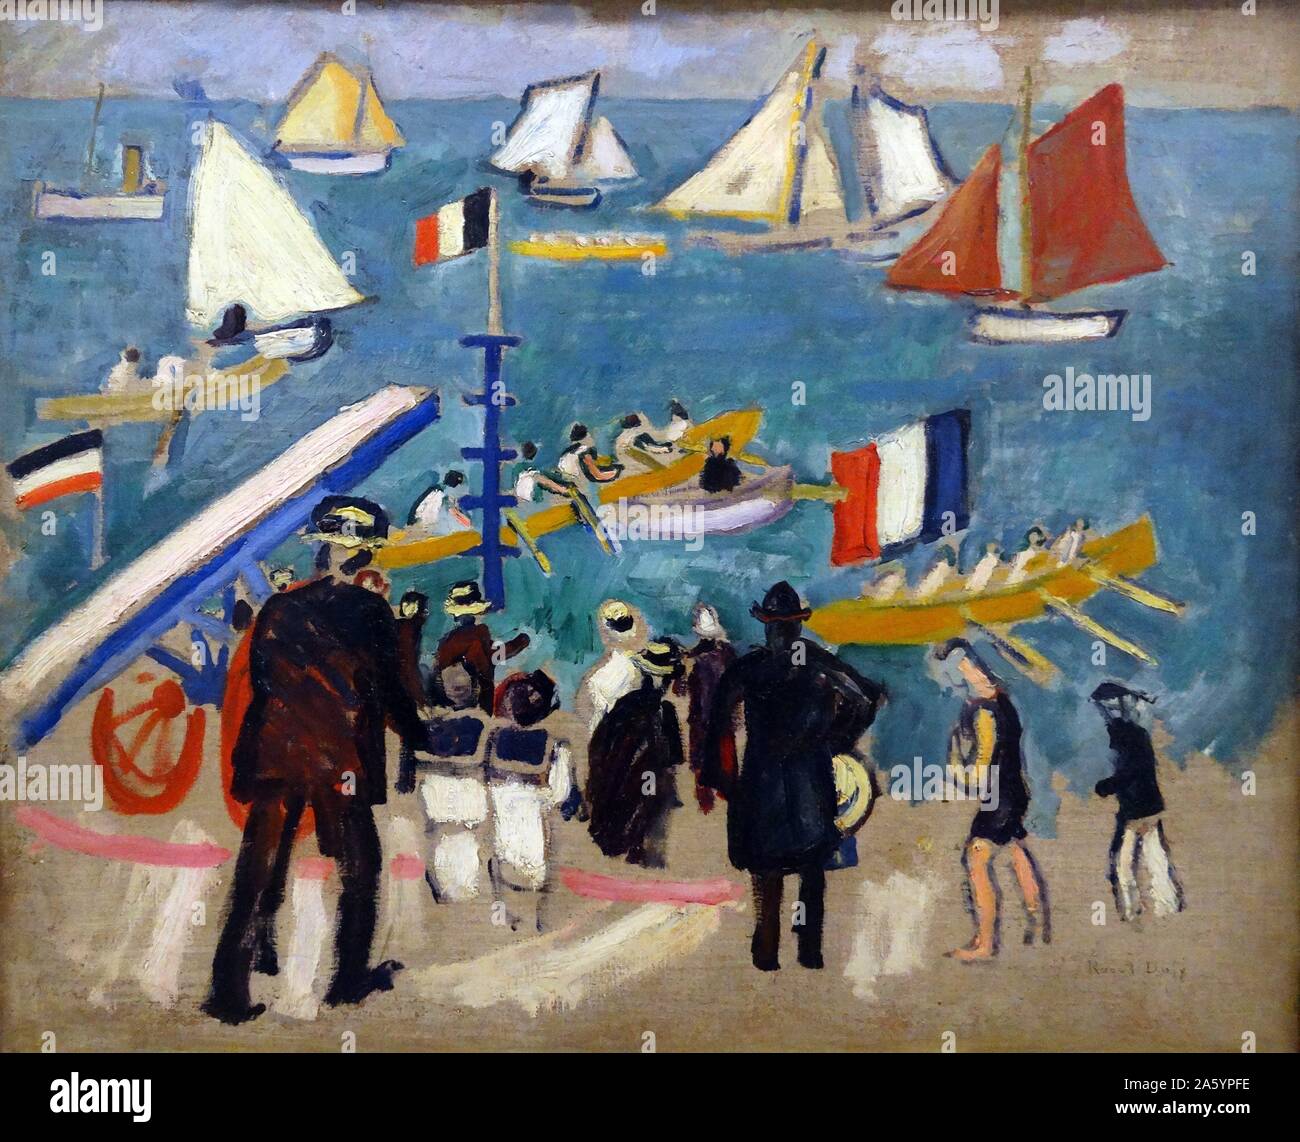 Painting titled 'The Regates' by Raoul Dufy (1877-1953) French Fauvist painter. Dated 1908 Stock Photo